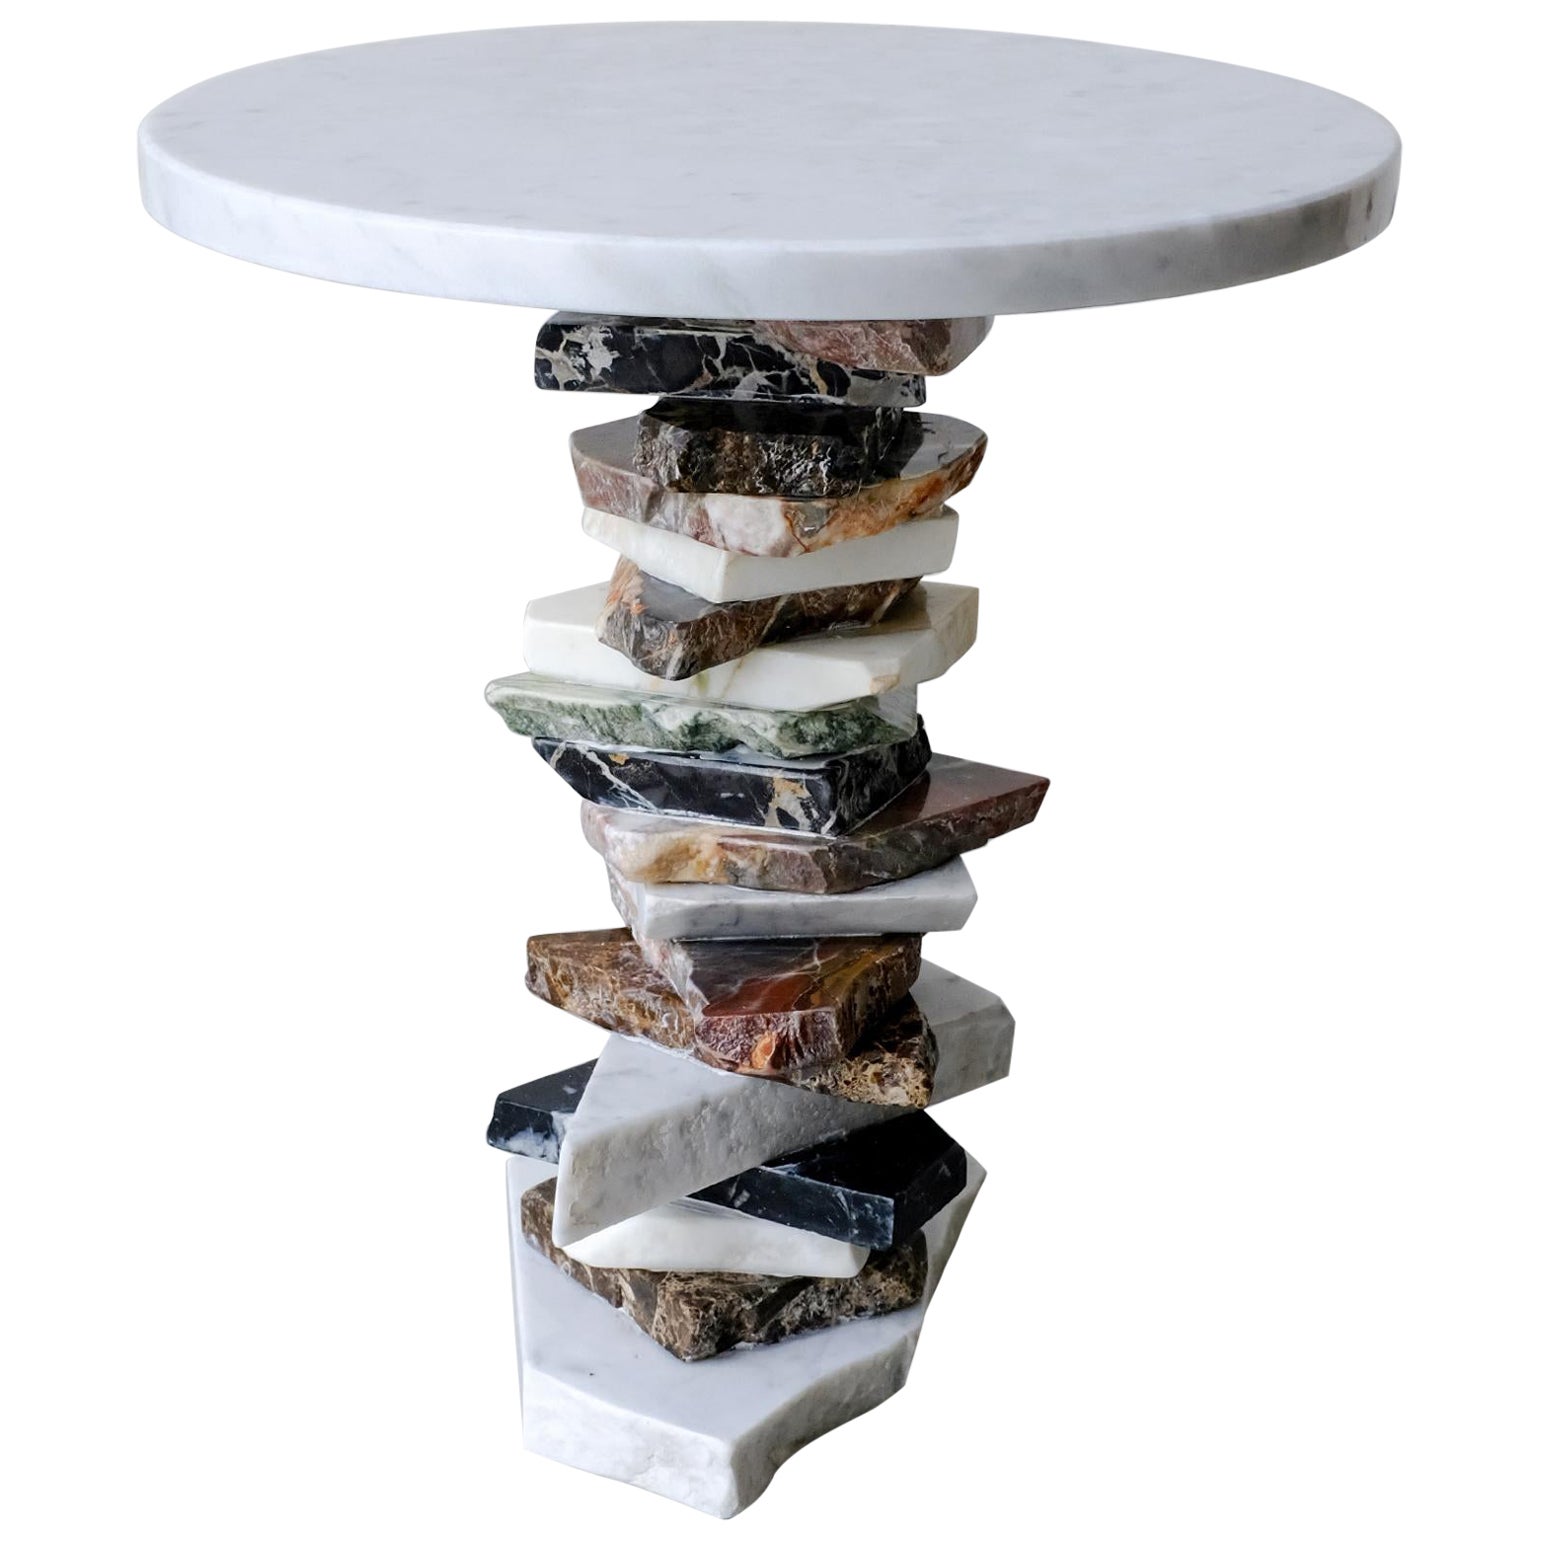 SST006 Small Table by Stone Stackers